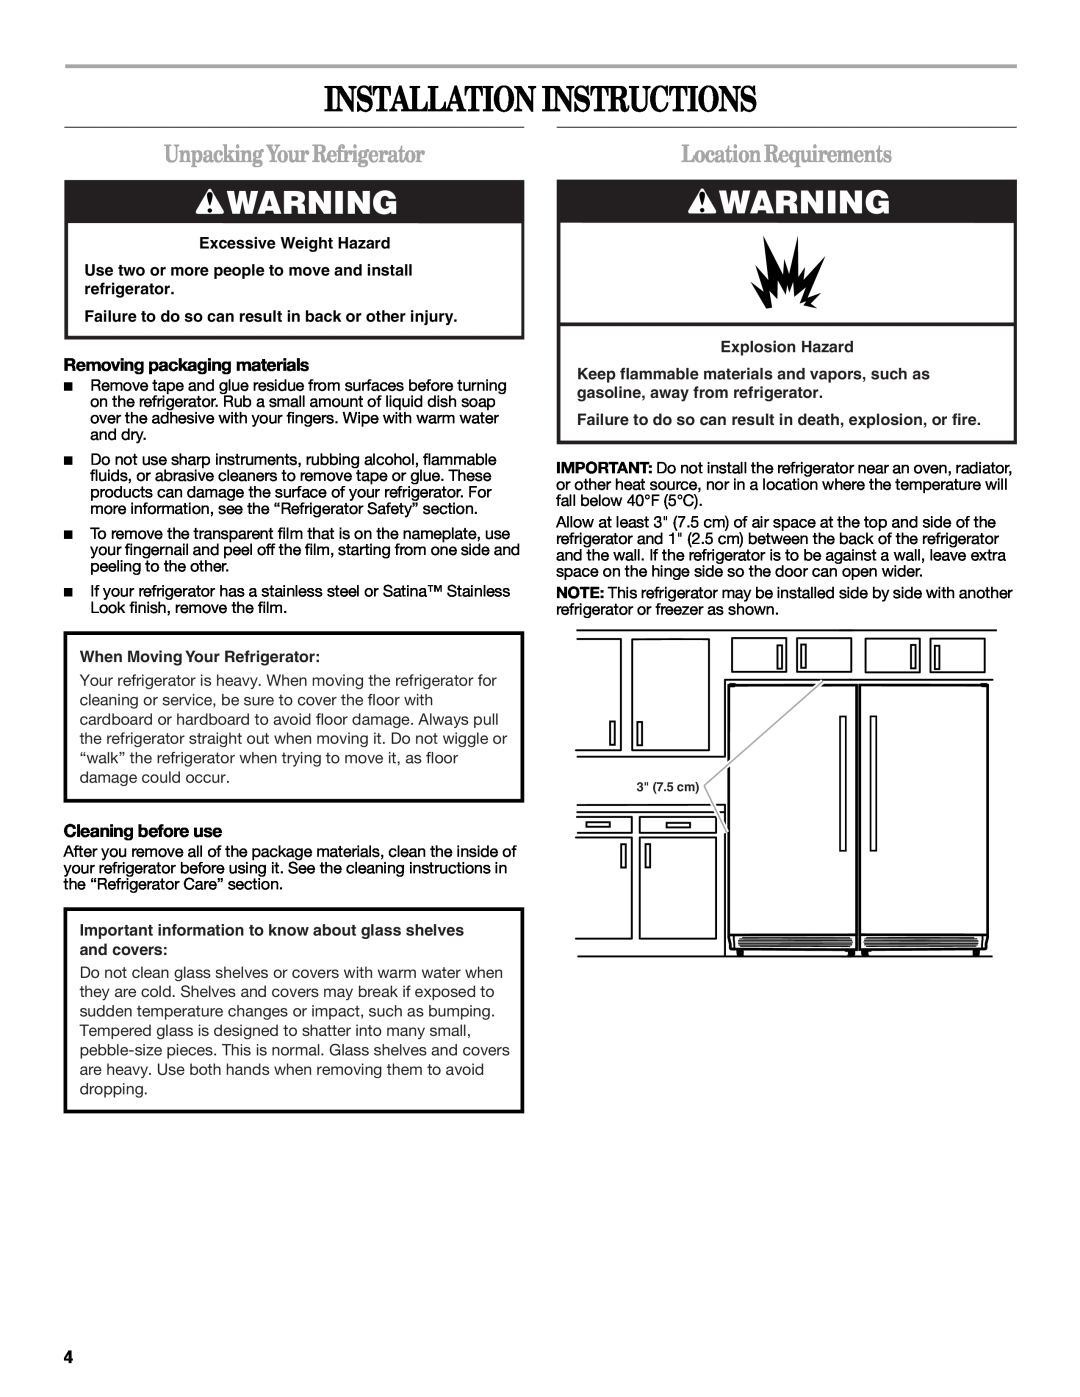 Whirlpool W10326802B Installation Instructions, Unpacking Your Refrigerator, LocationRequirements, Cleaning before use 